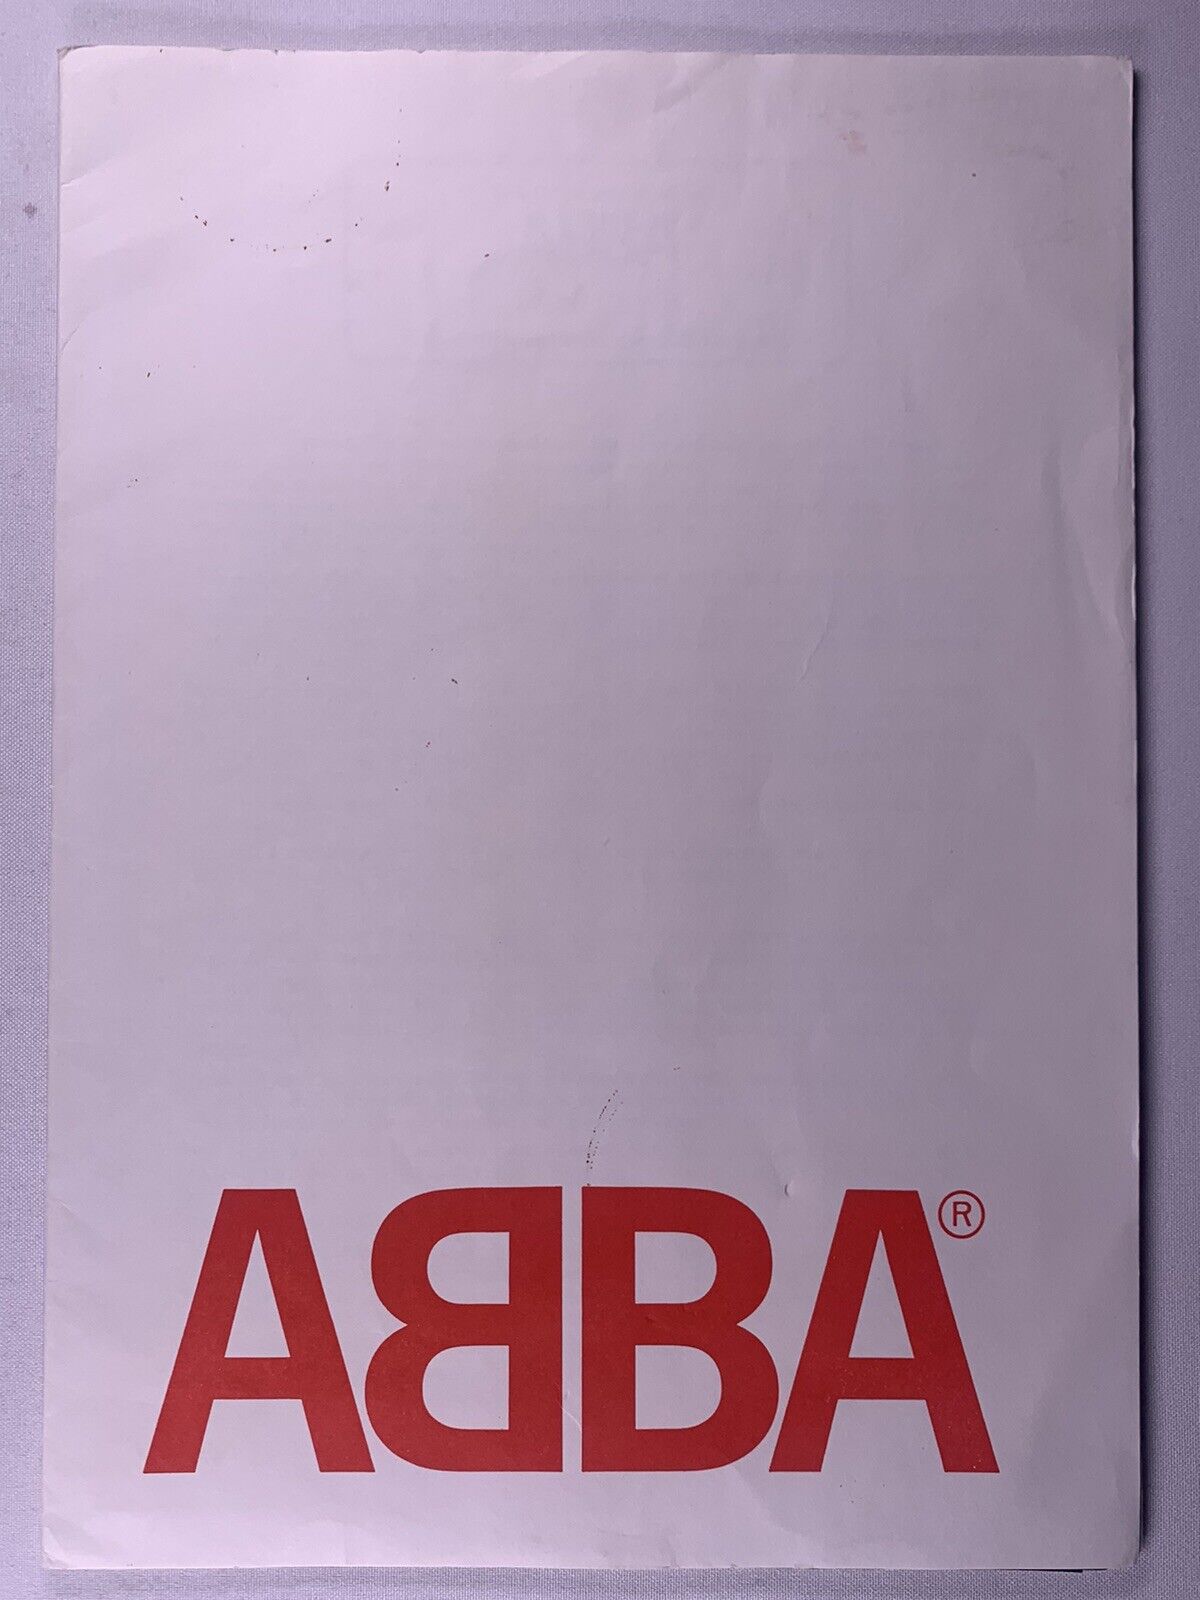 ABBA Fan Club Pack Membership Welcome Includes Posters Biographies Circa 1979